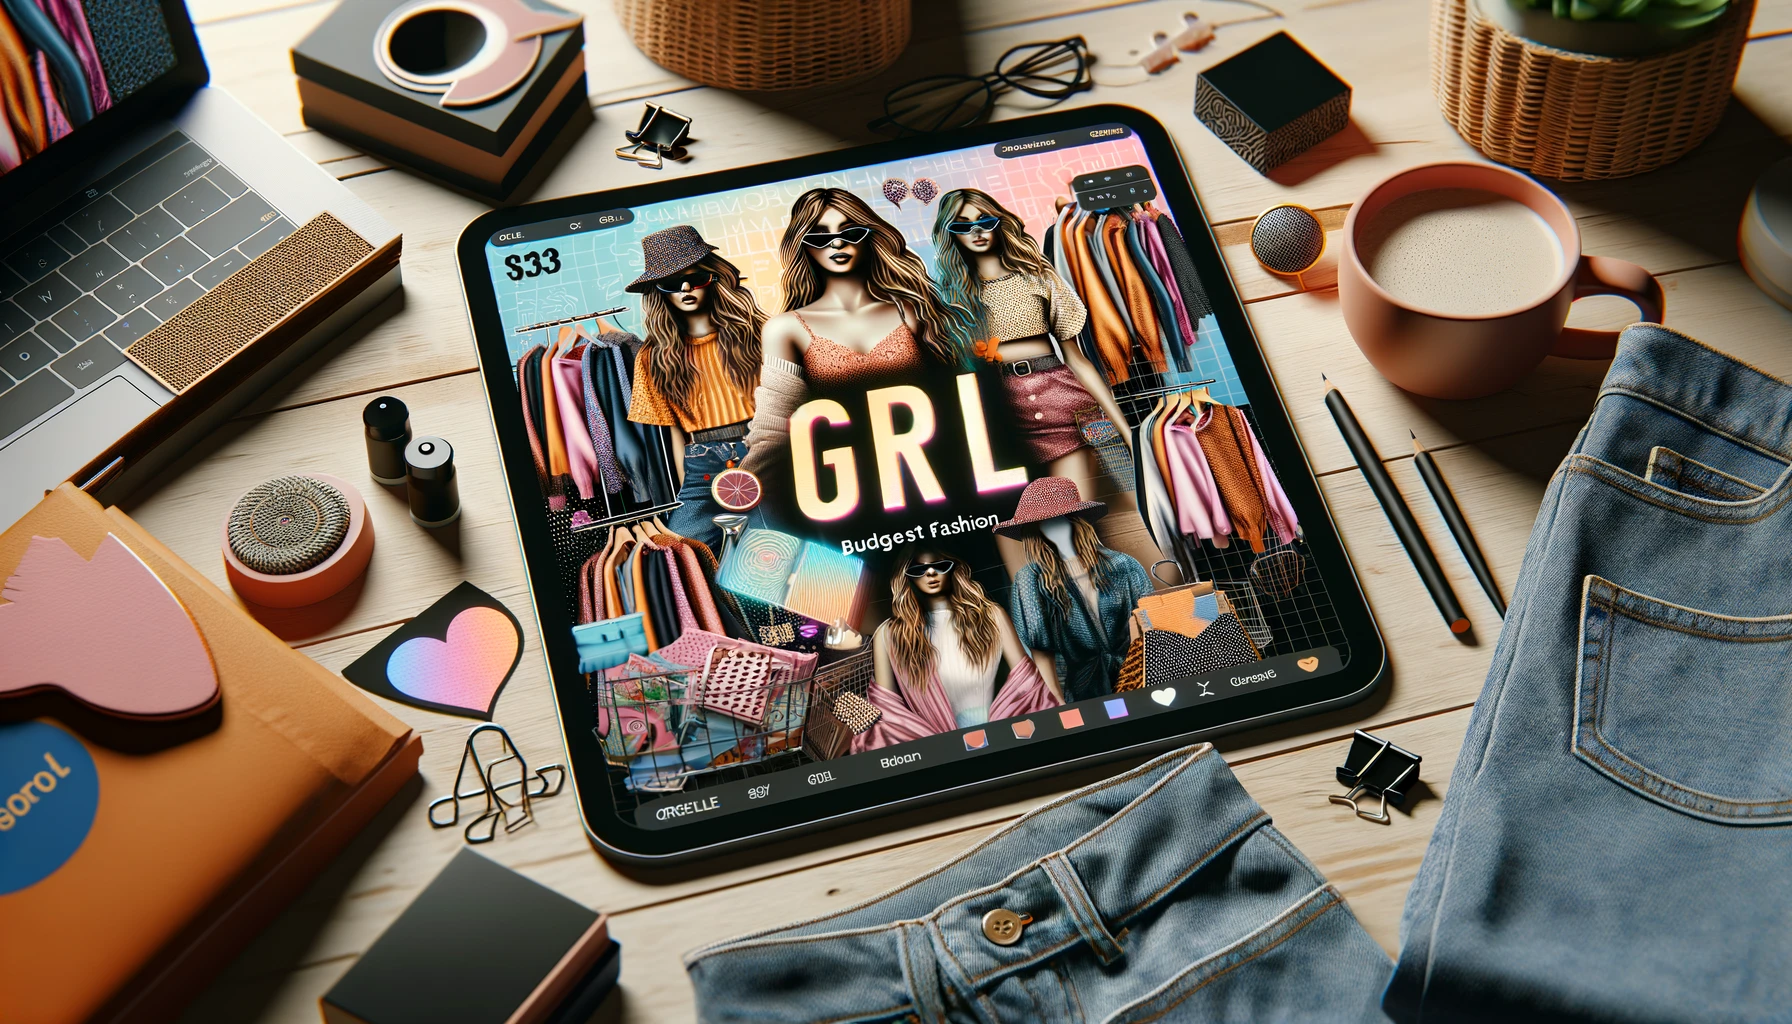 A stylish layout for a women's budget fashion brand named 'GRL' with a focus on virtual stores. The image features trendy and affordable clothing items displayed attractively, with visual elements representing a virtual shopping experience. Incorporate the word 'GRL' prominently in the design. The background should be vibrant and fashionable, reflecting the brand's appeal to young women. The image should be in a 16:9 aspect ratio.